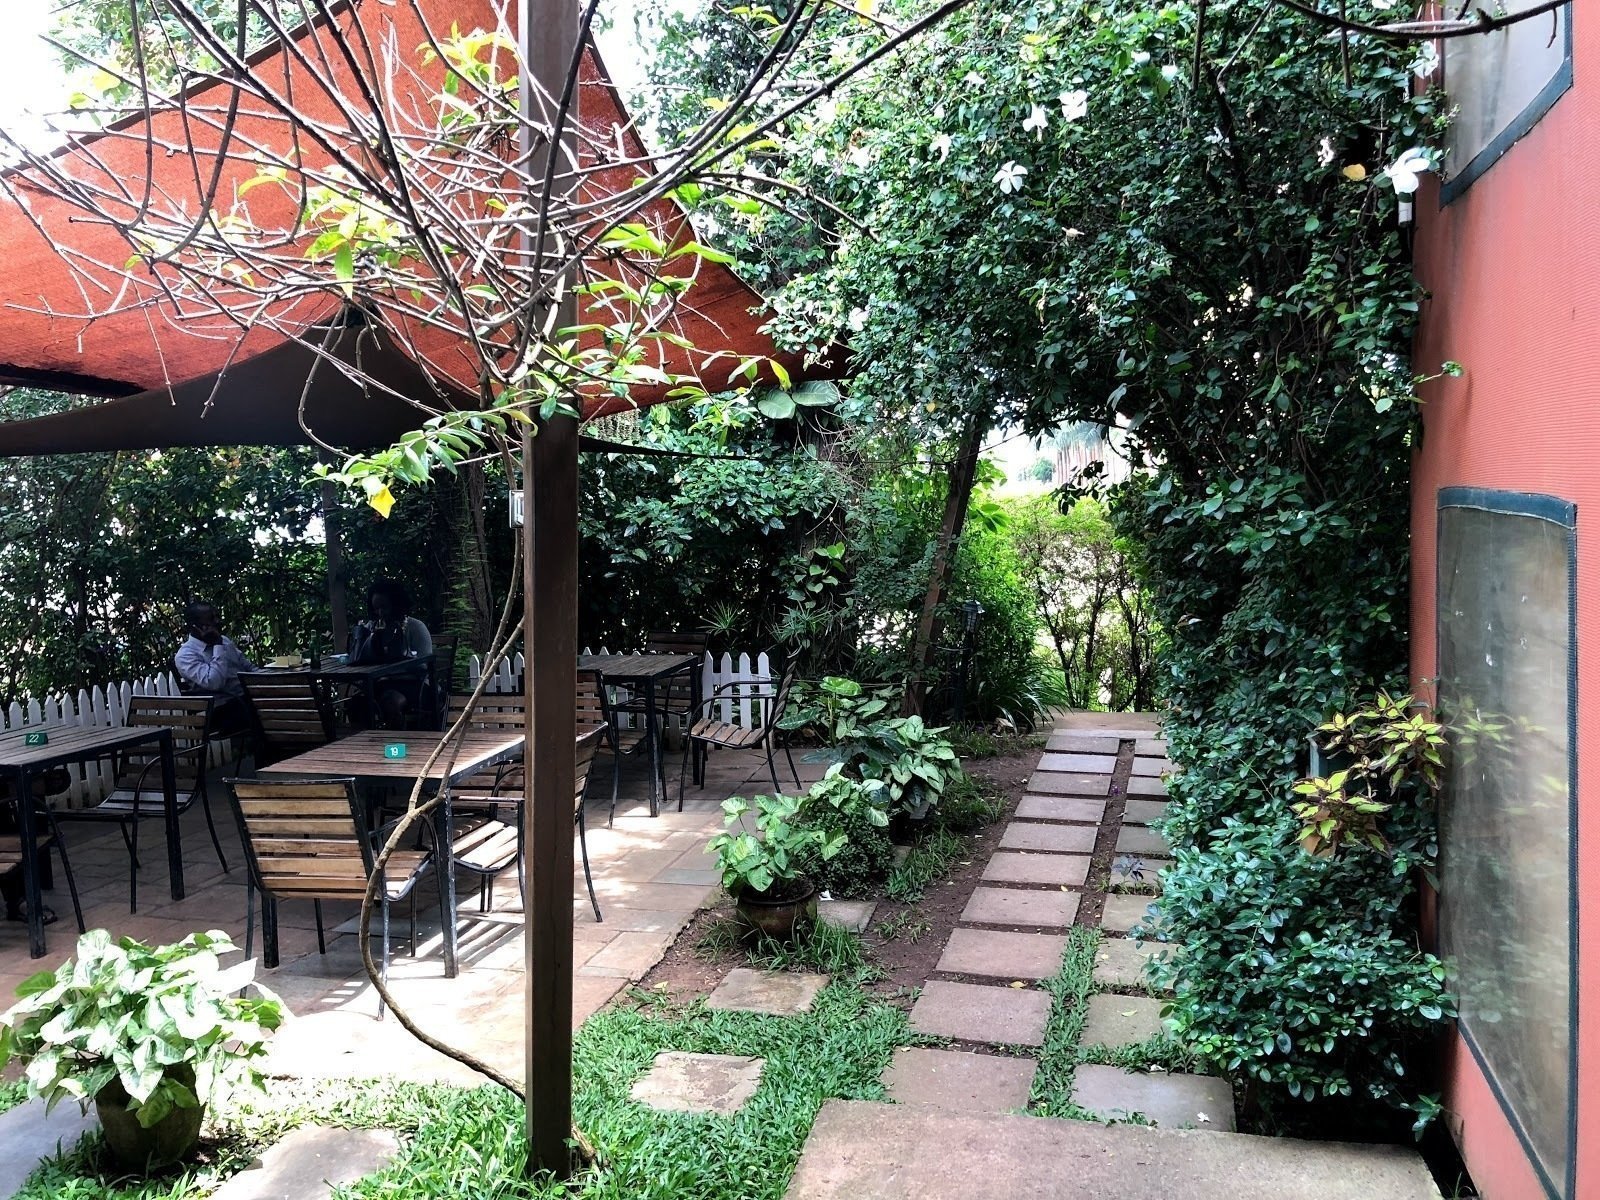 <span class="translation_missing" title="translation missing: en.meta.location_title, location_name: Endiro Coffee @ Cooper Rd, city: Kampala">Location Title</span>